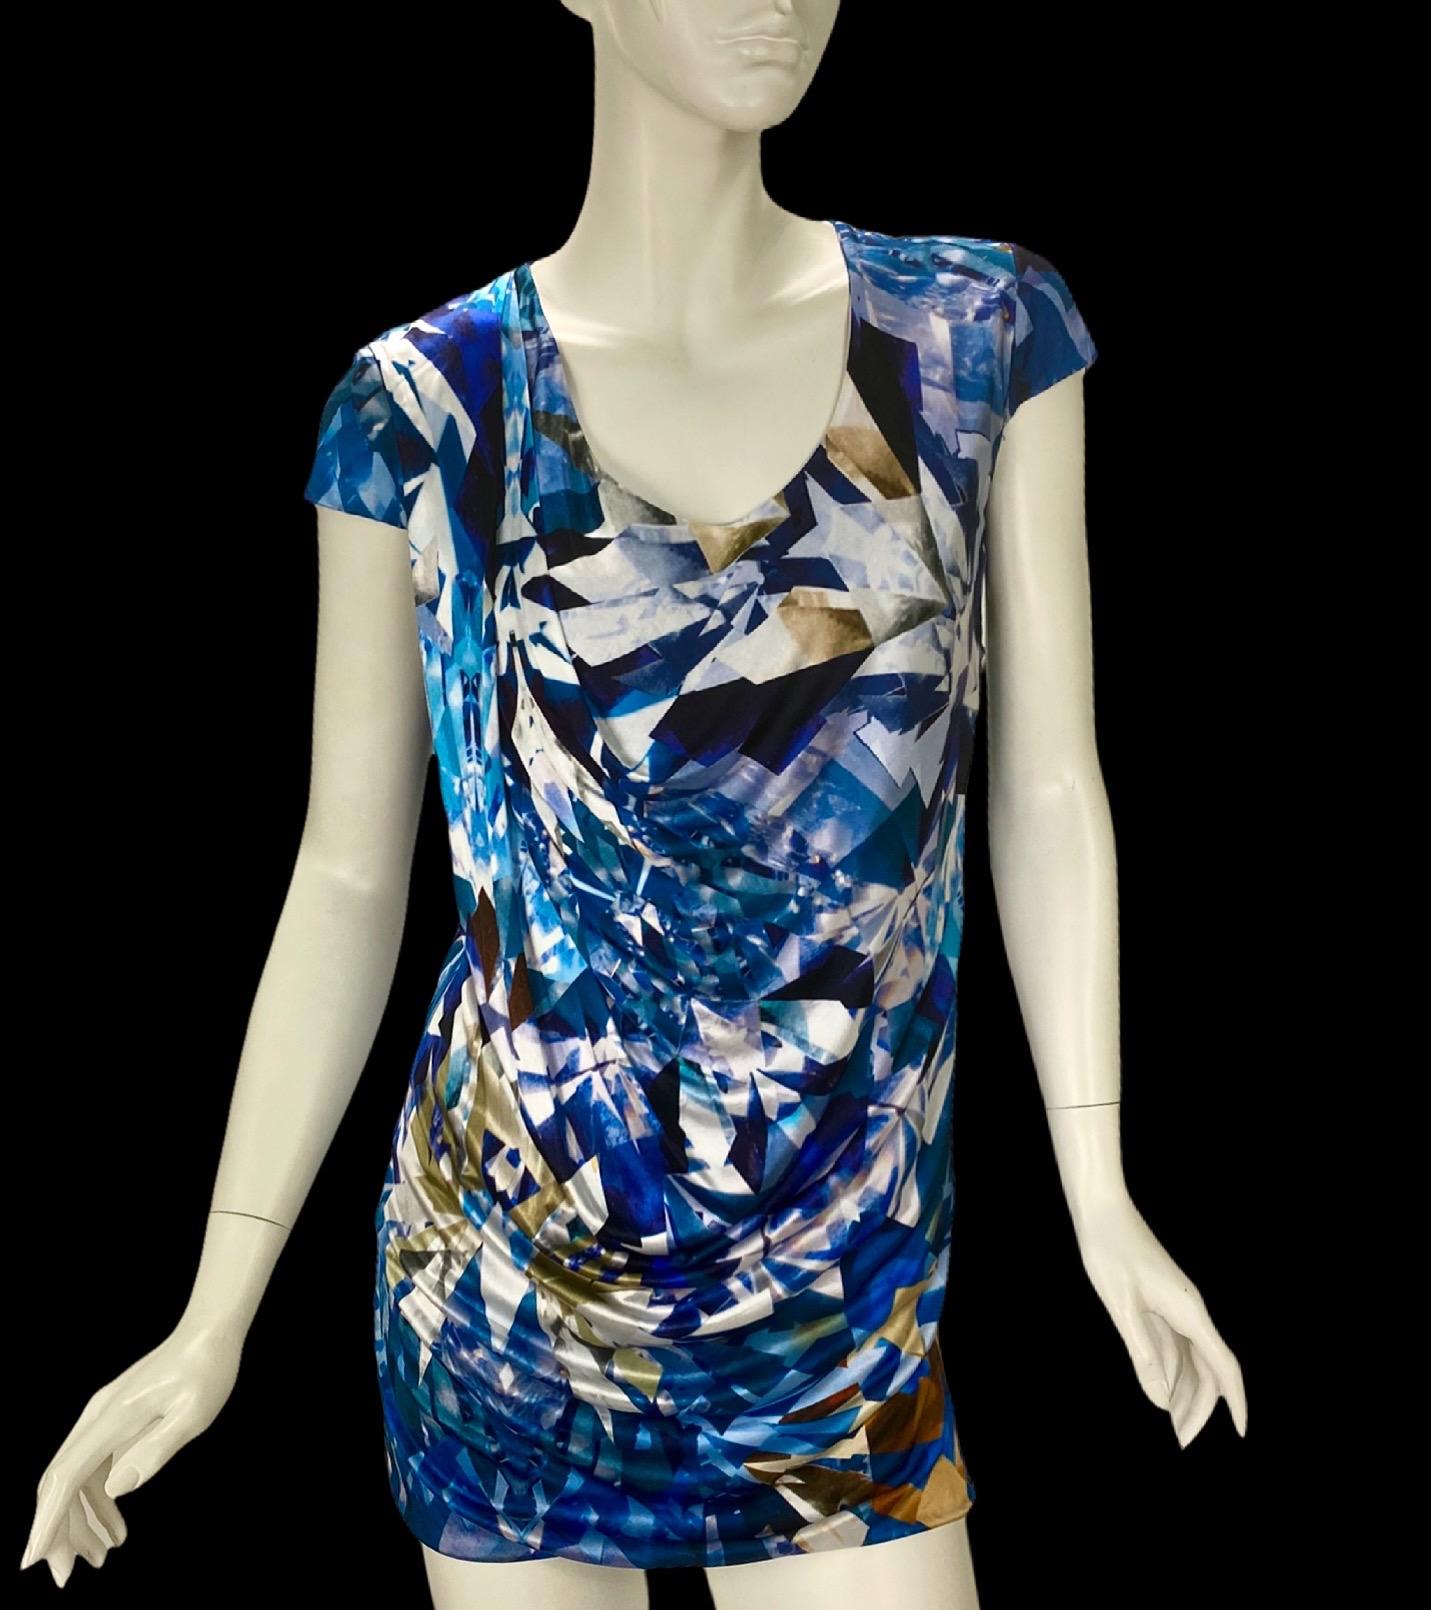 Vintage Alexander McQueen Kaleidoscope Print Tunic Dress 

IT Size 44

Draped 

Excellent condition

Fully lined

Made in Italy

Iconic statement piece!